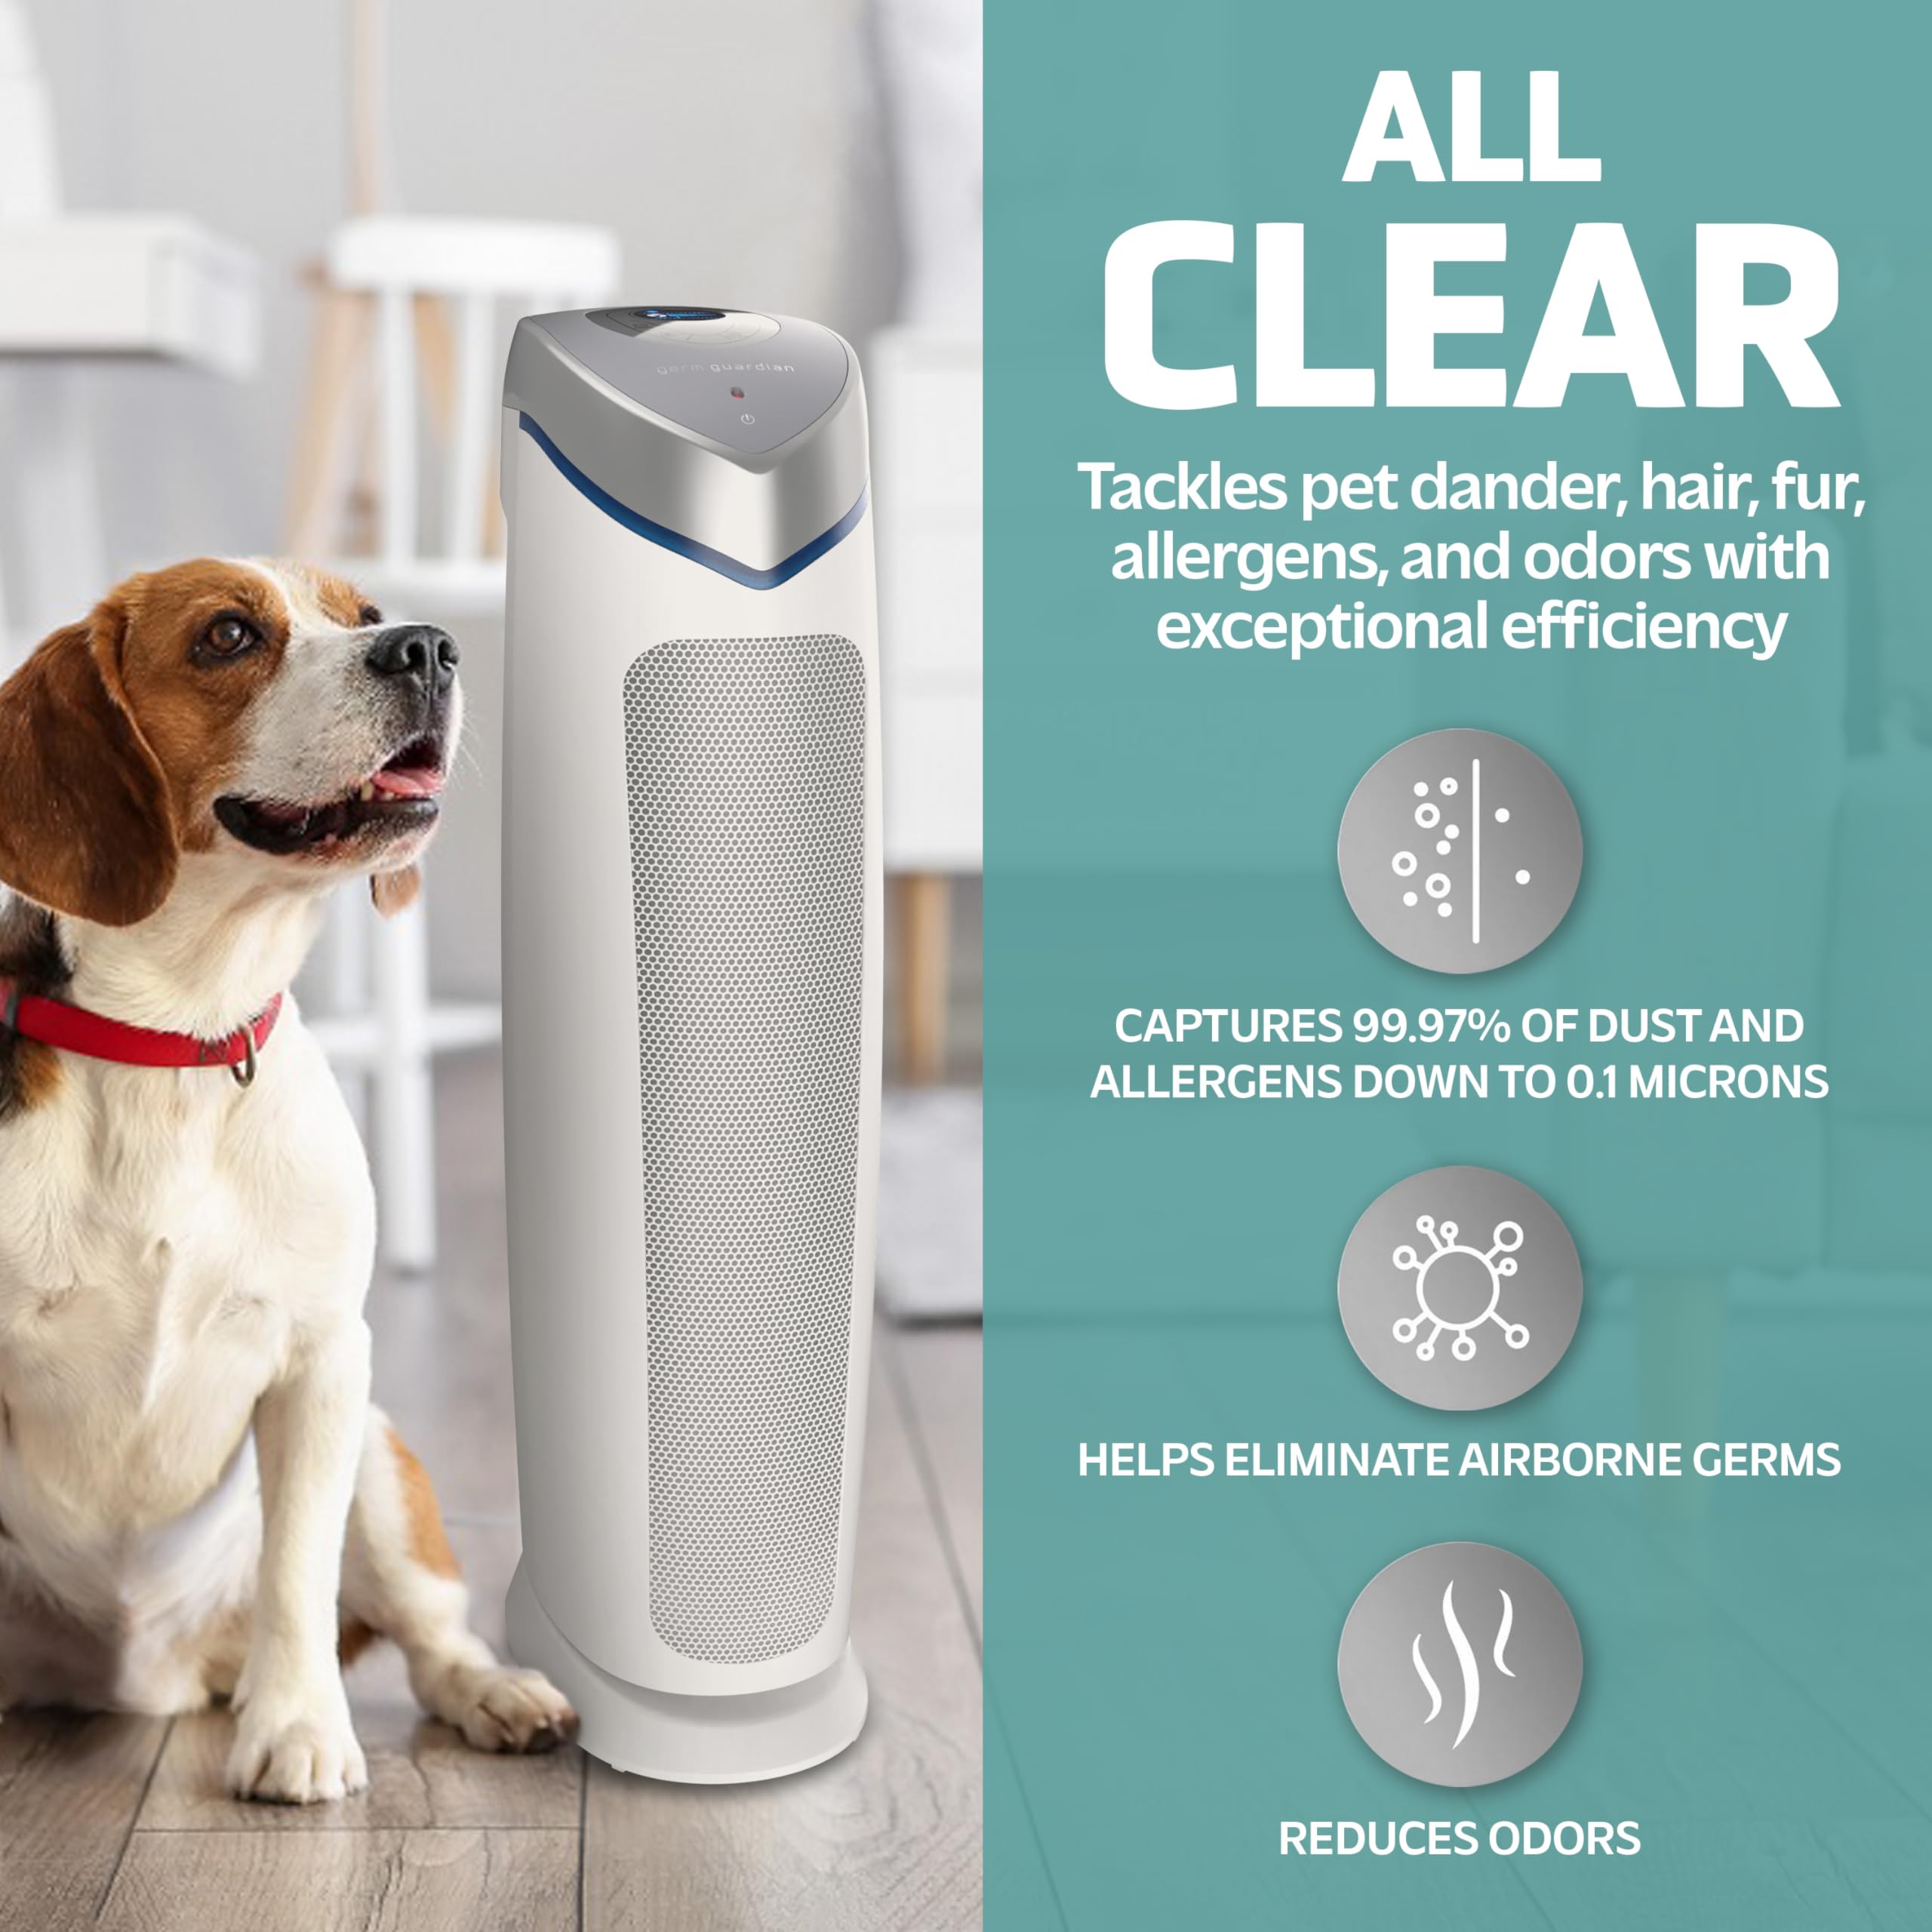 GermGuardian Air Purifier with Genuine HEPA 13 Pet Pure Filter, Removes 99.97% of Pollutants, Covers Large Rooms up to 915 Sq. ft. in 1 Hour, UV-C Light Helps Reduce Germs, 28